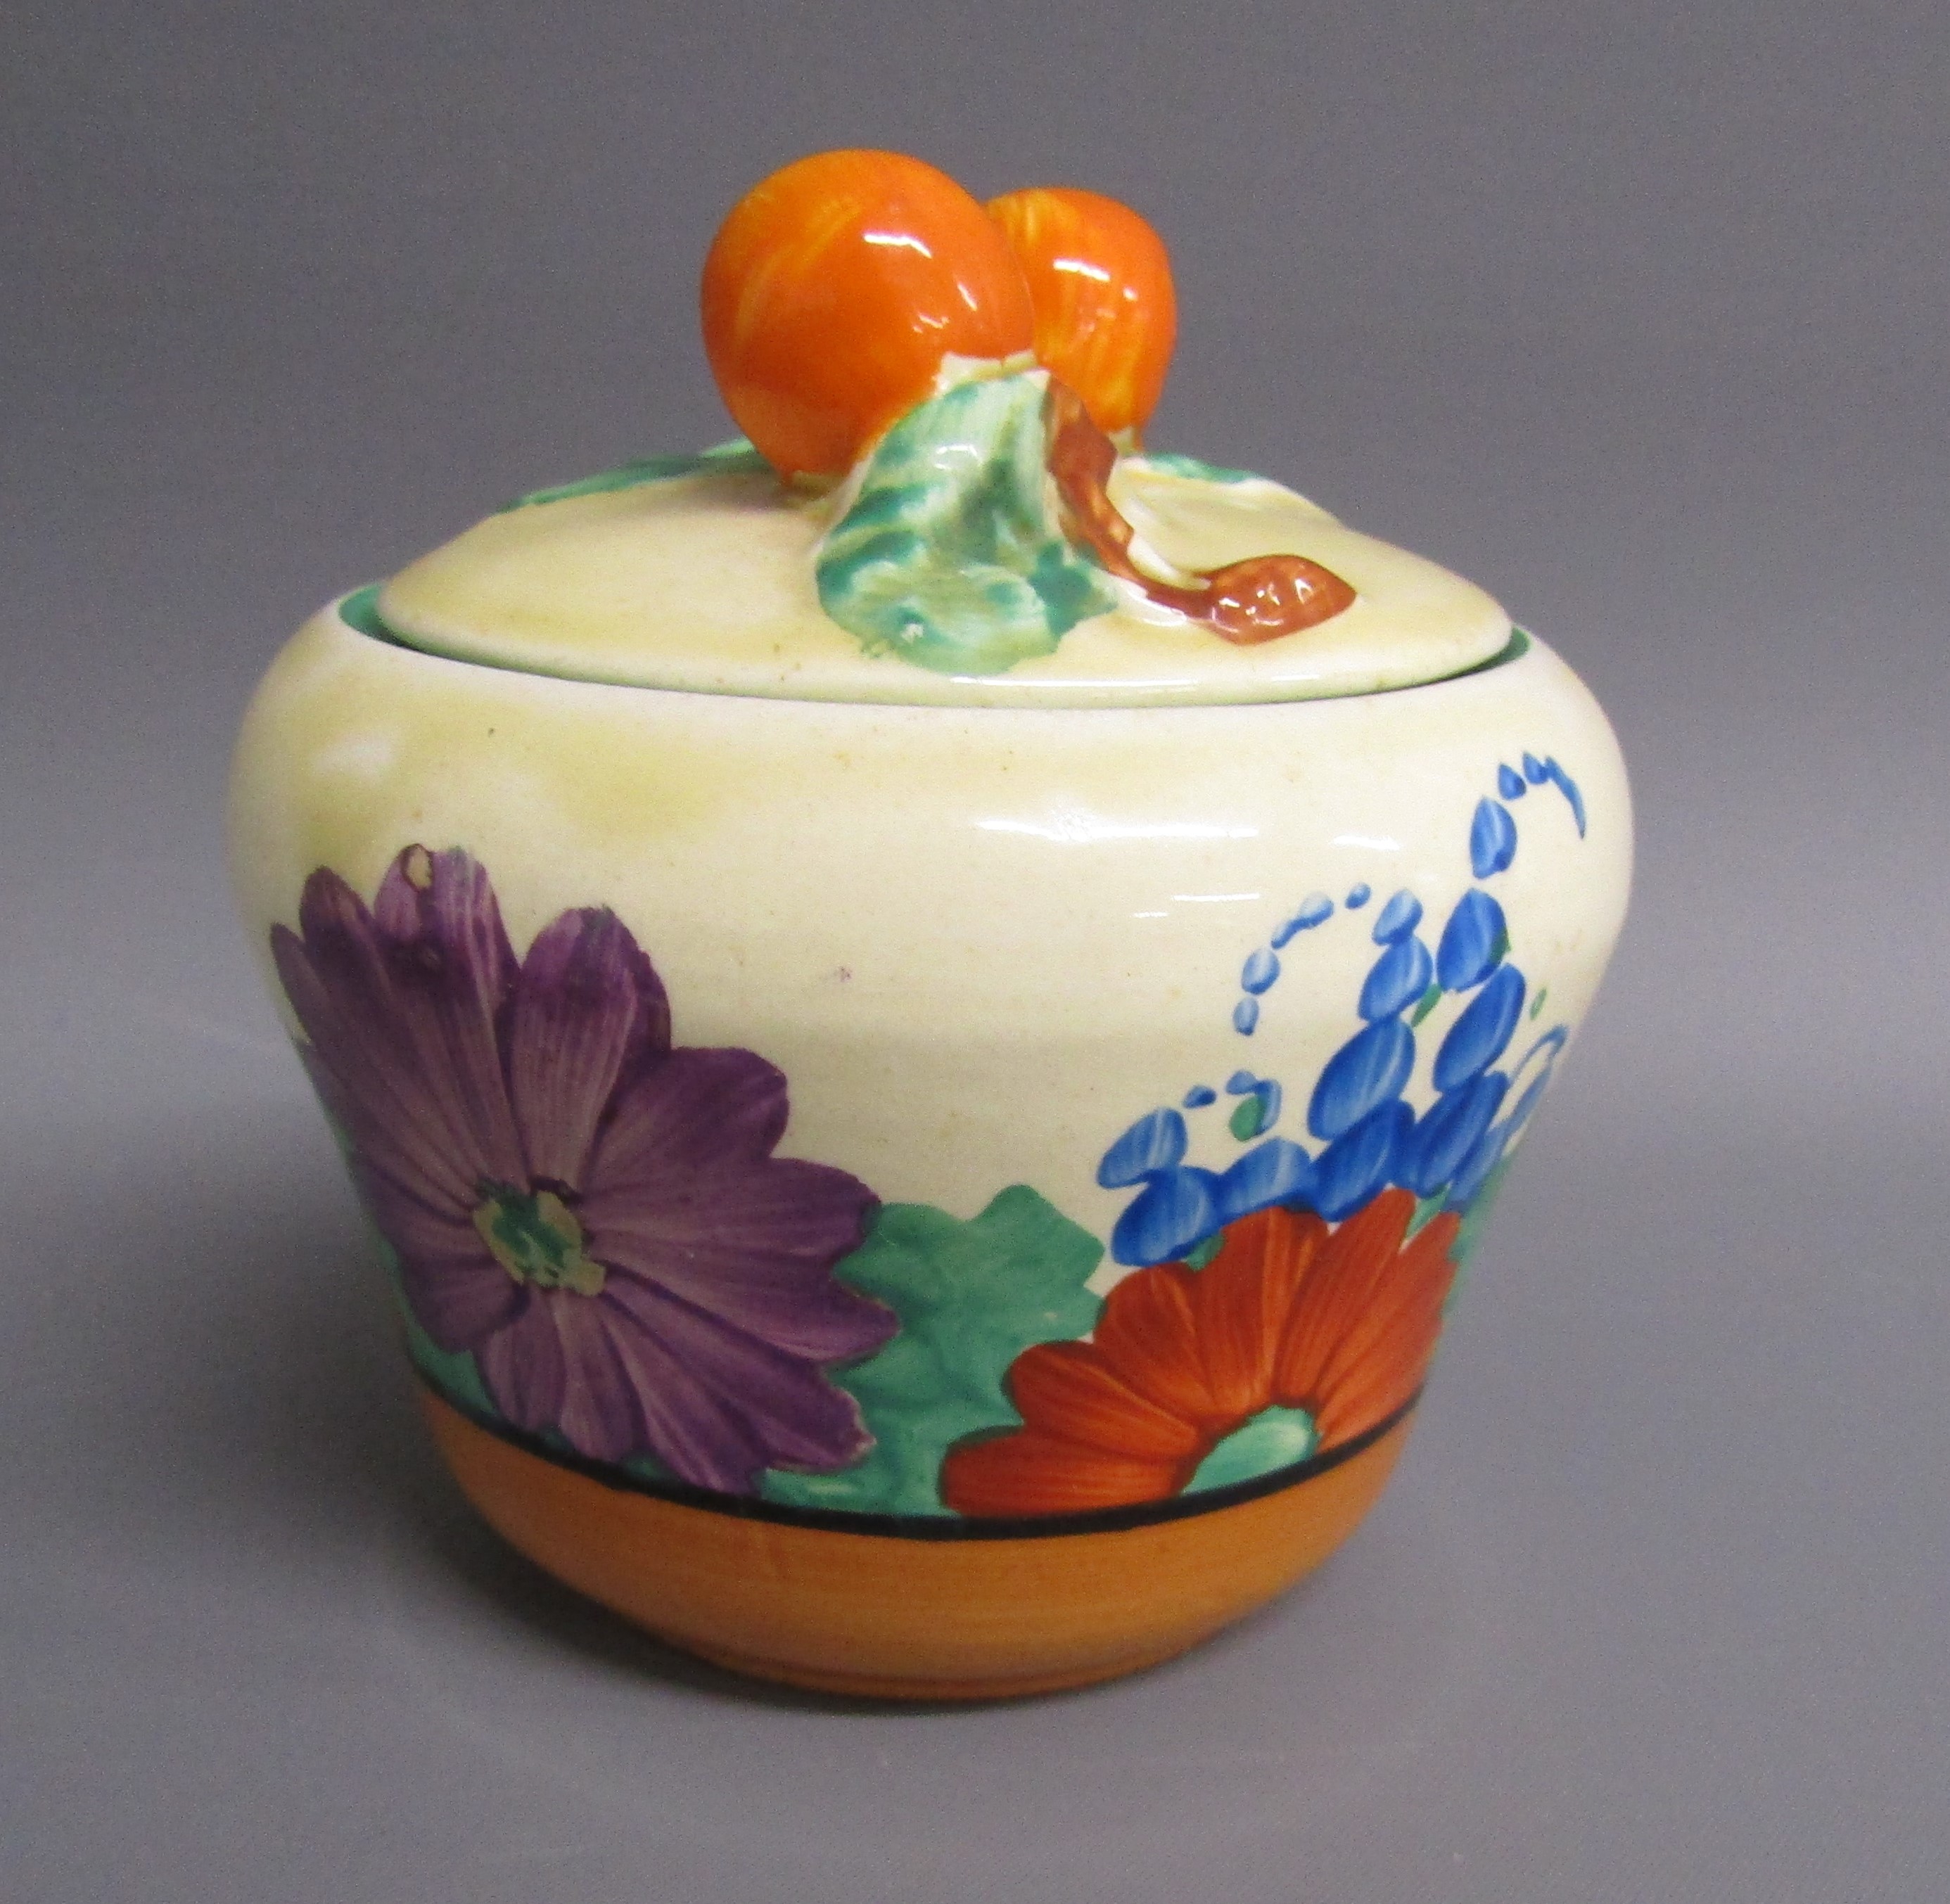 Bizarre by Clarice Cliff 'Gay Day' jam pot - approx. 8cm - Image 2 of 5